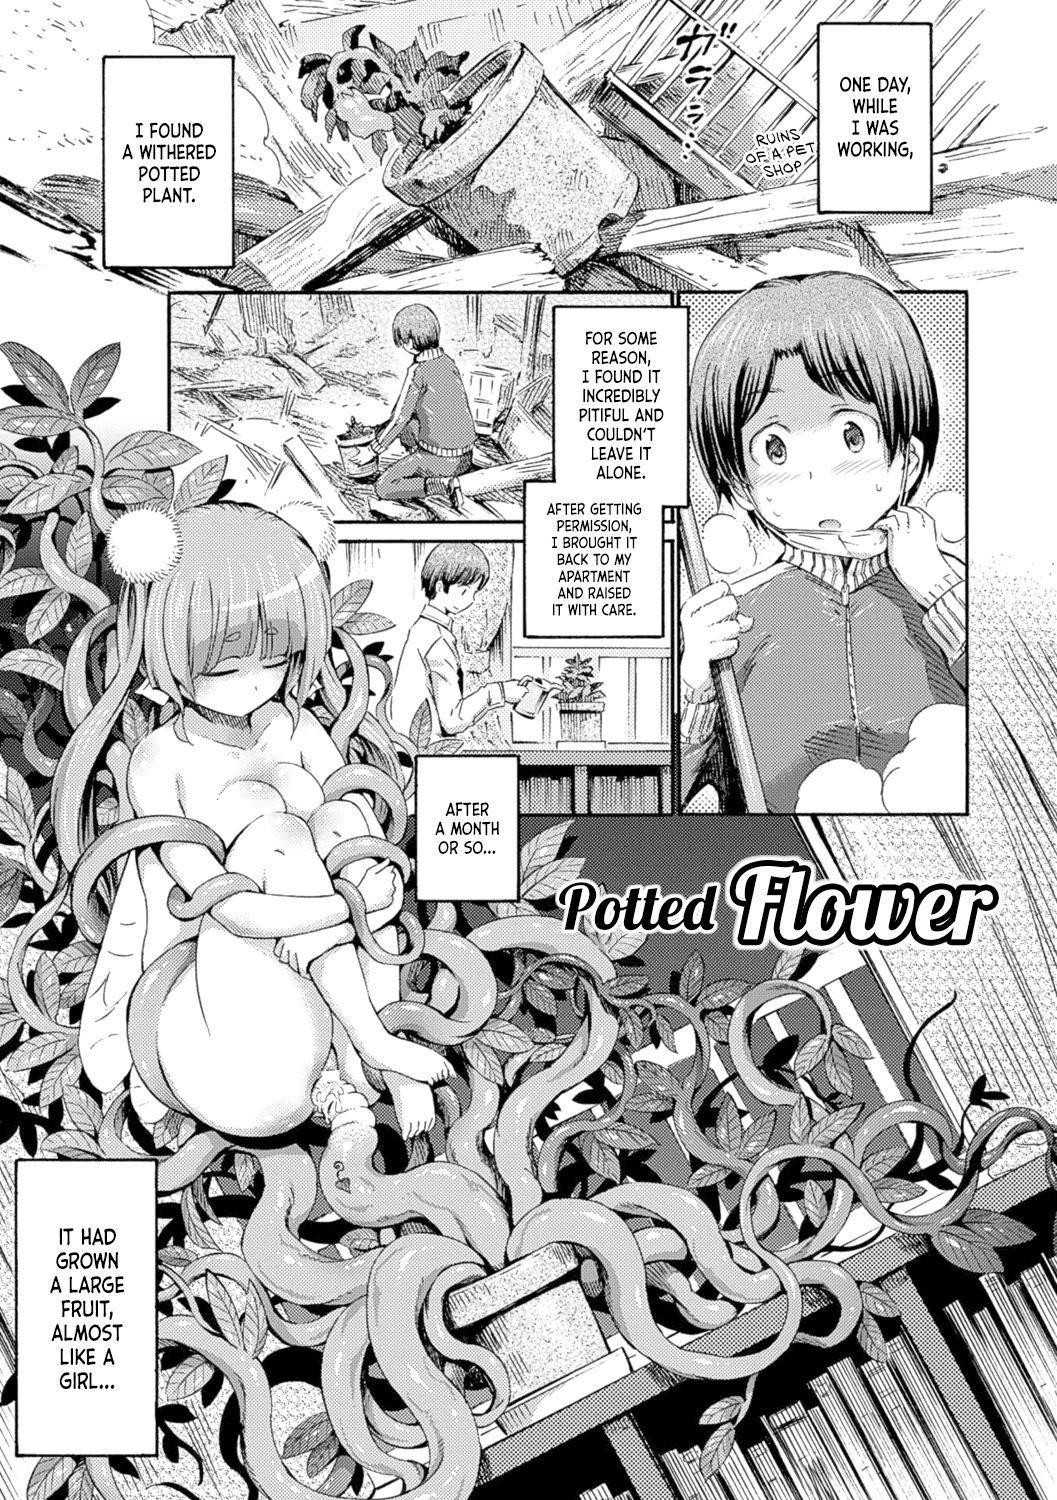 Skinny Hachi no Ue no Flower | Potted Flower Cuckolding - Page 1